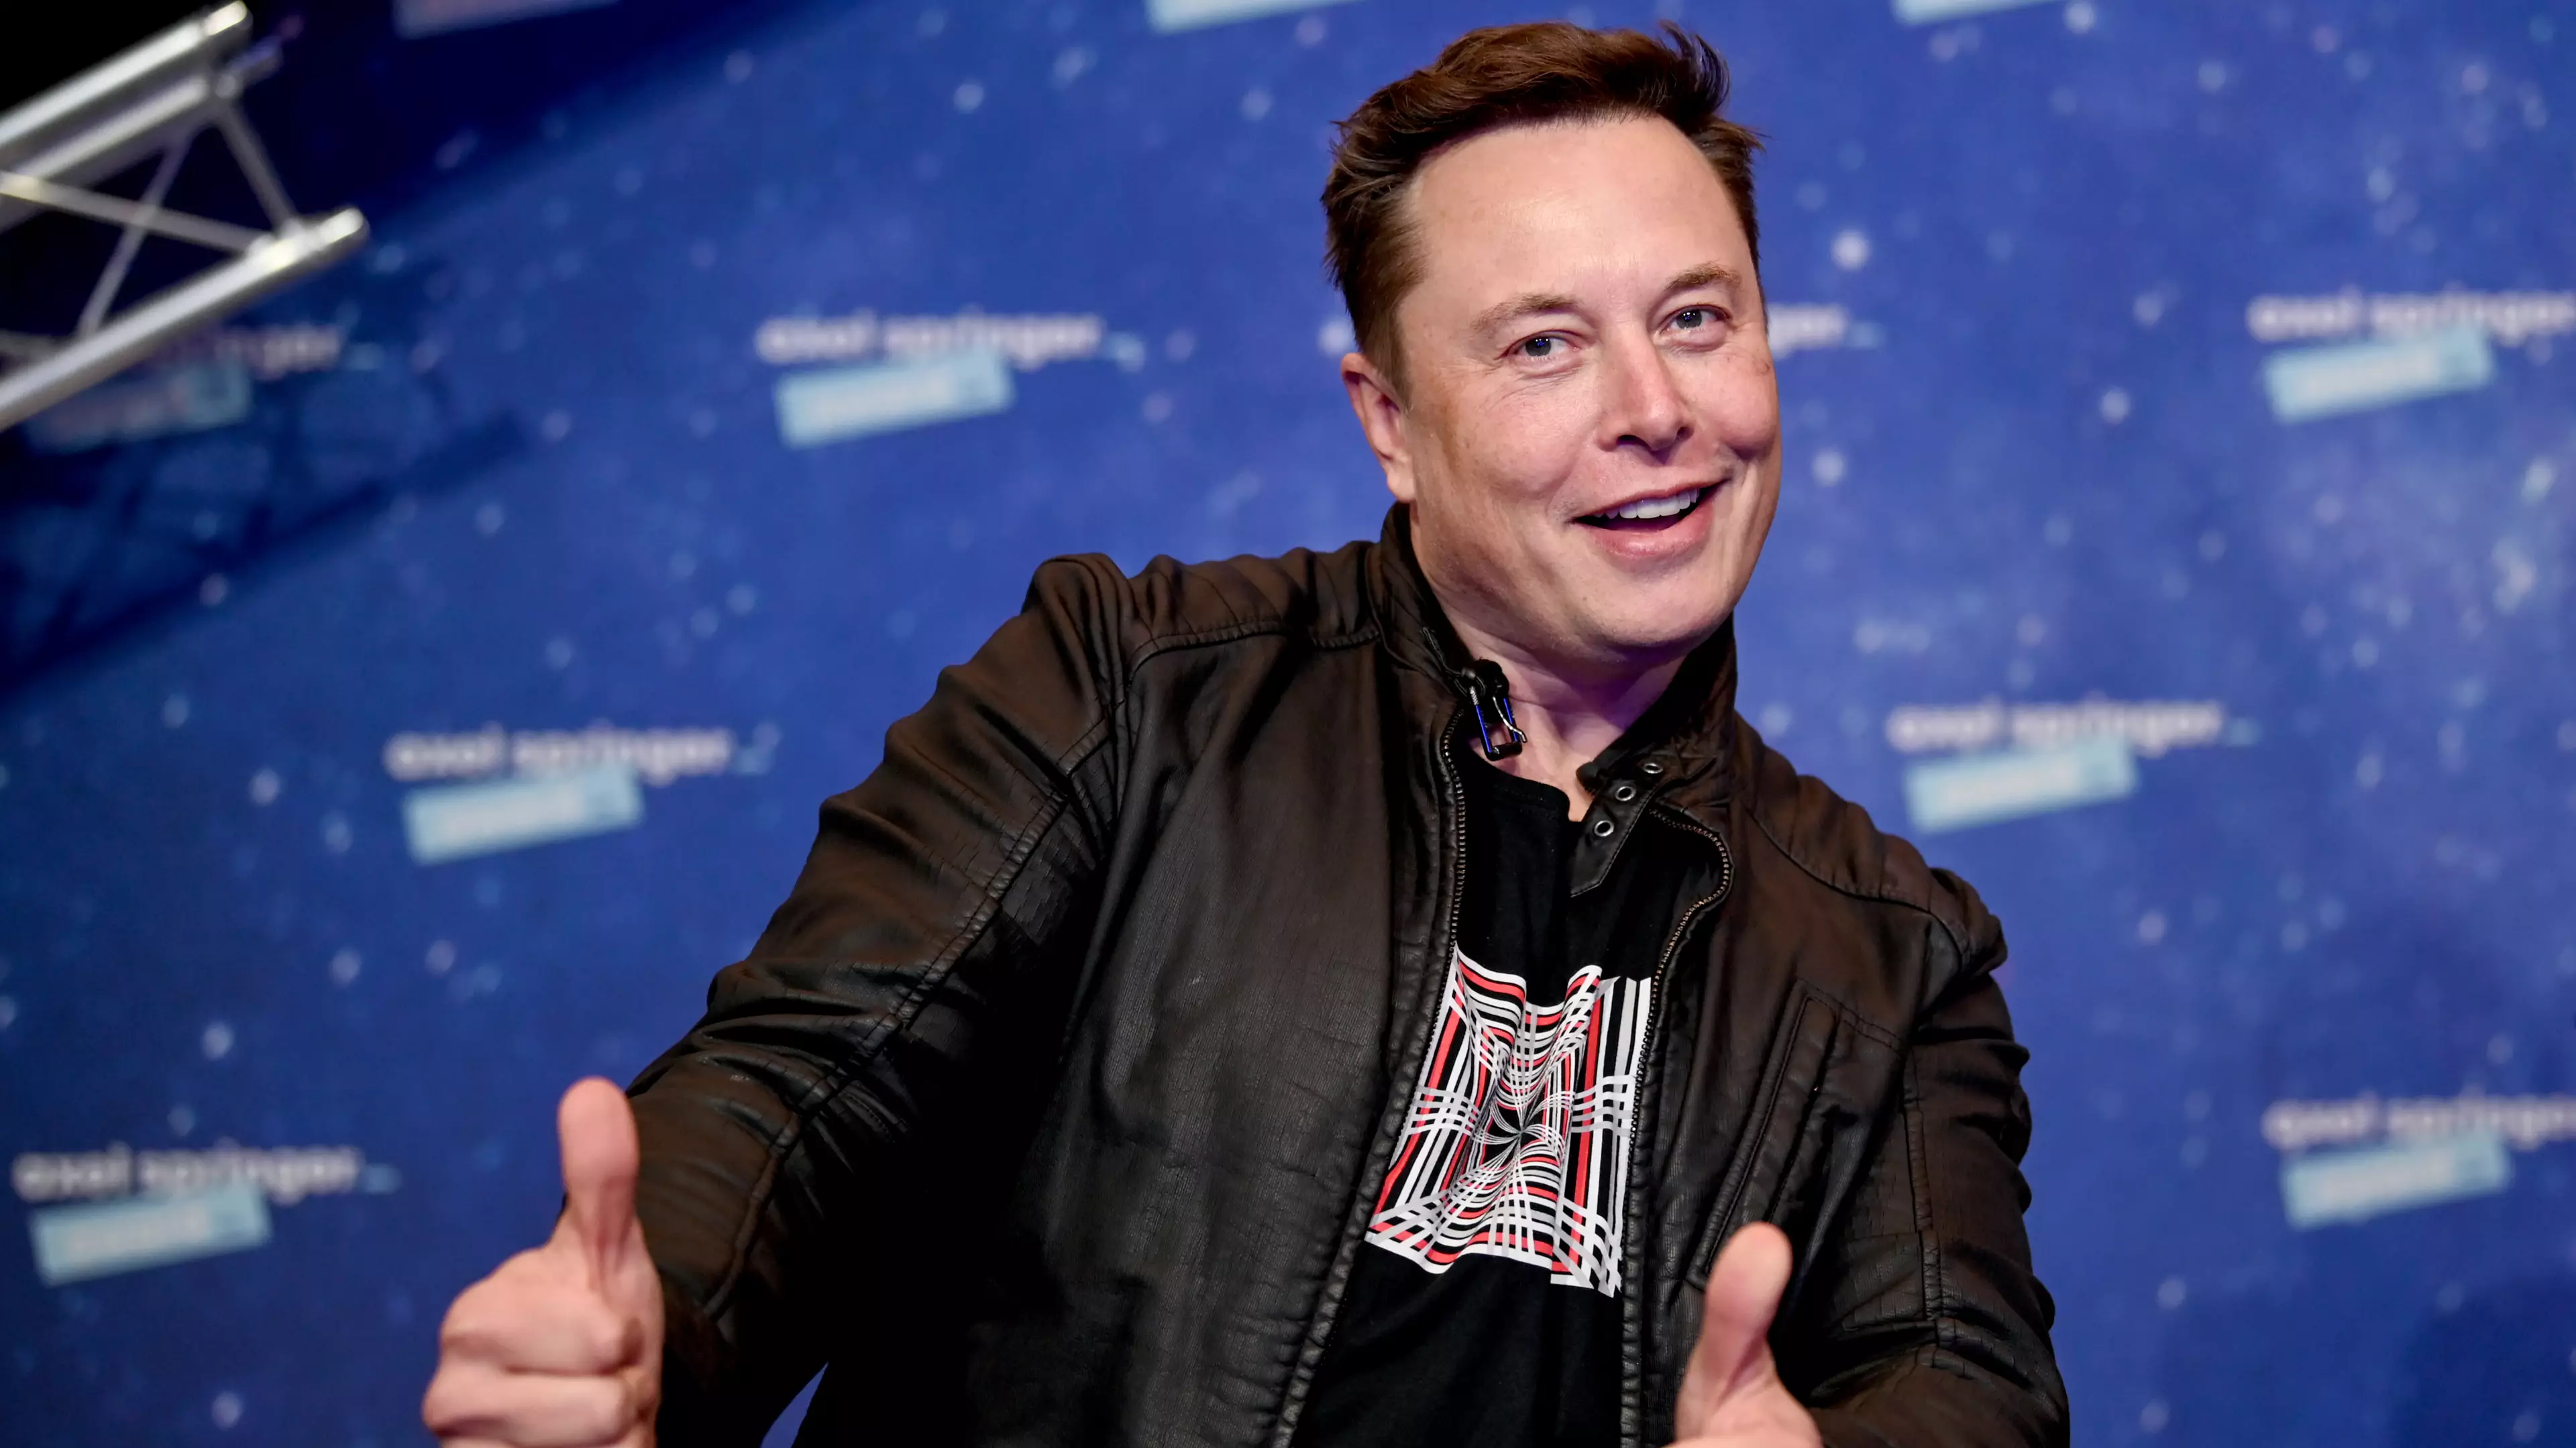 Elon Musk Sends Etsy Stock Soaring After Tweeting About Gift For His Dog